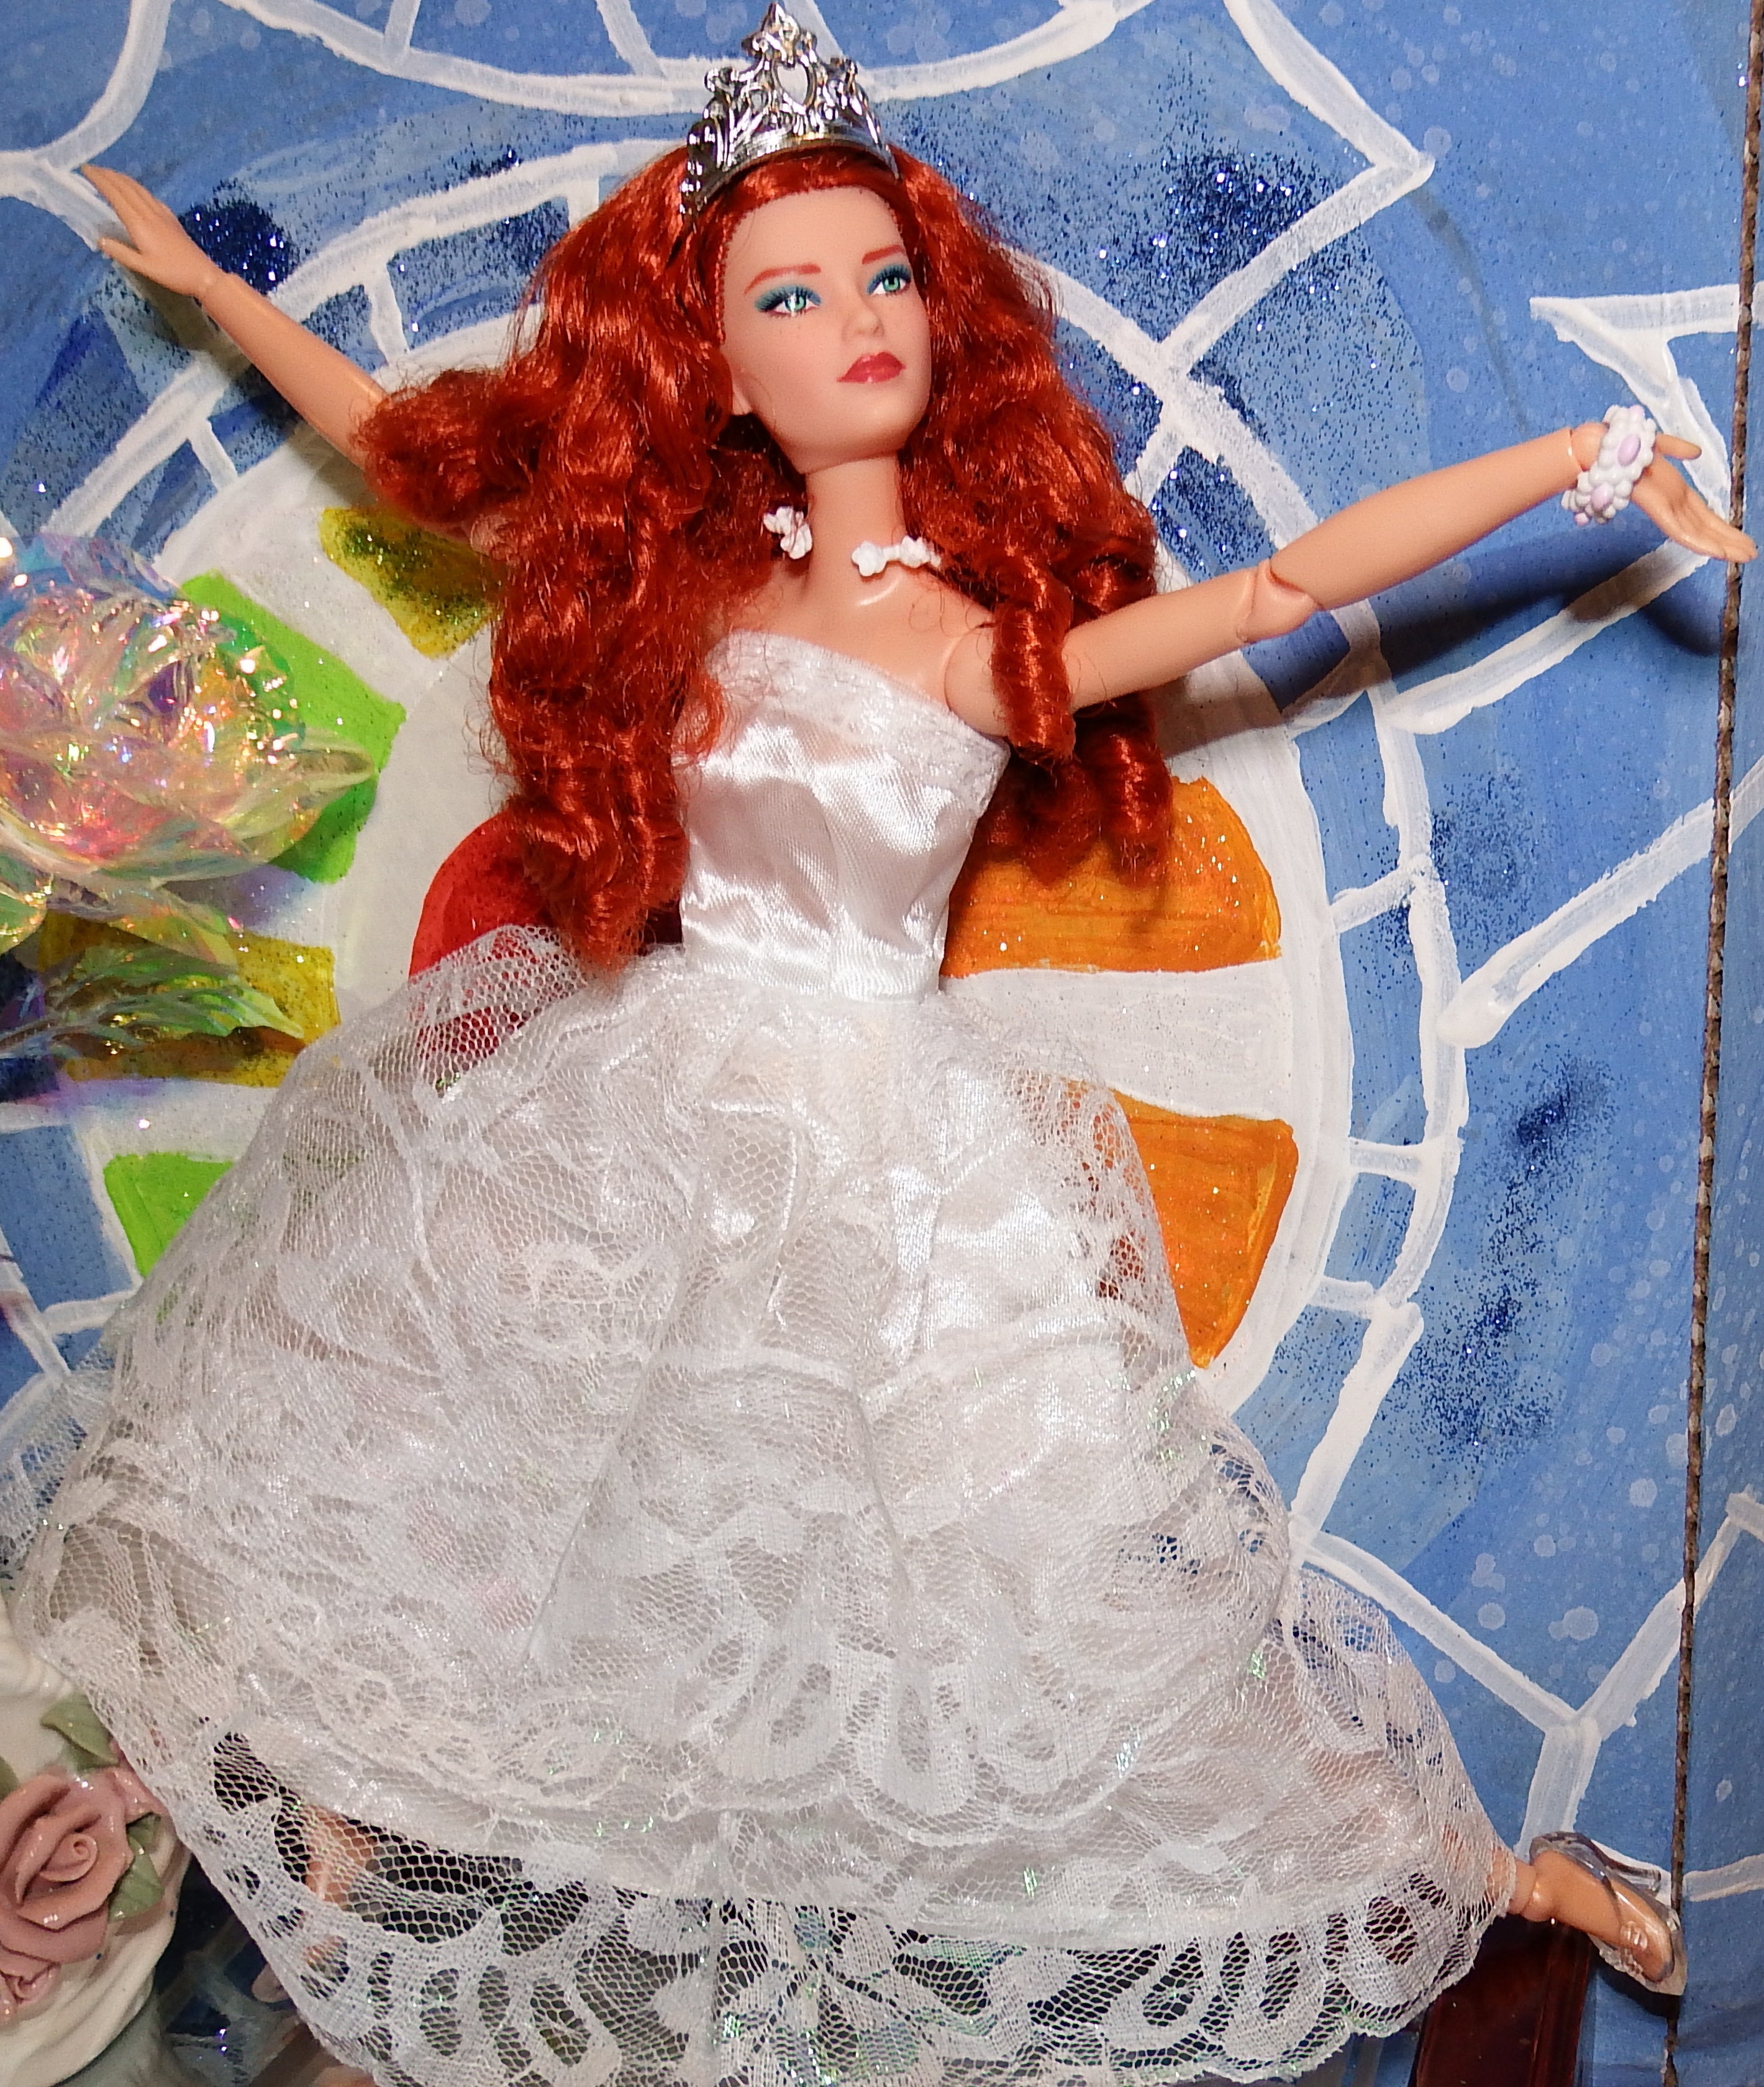 artsy sister Red Headed Barbie in a White Wedding Dress Photoshoot